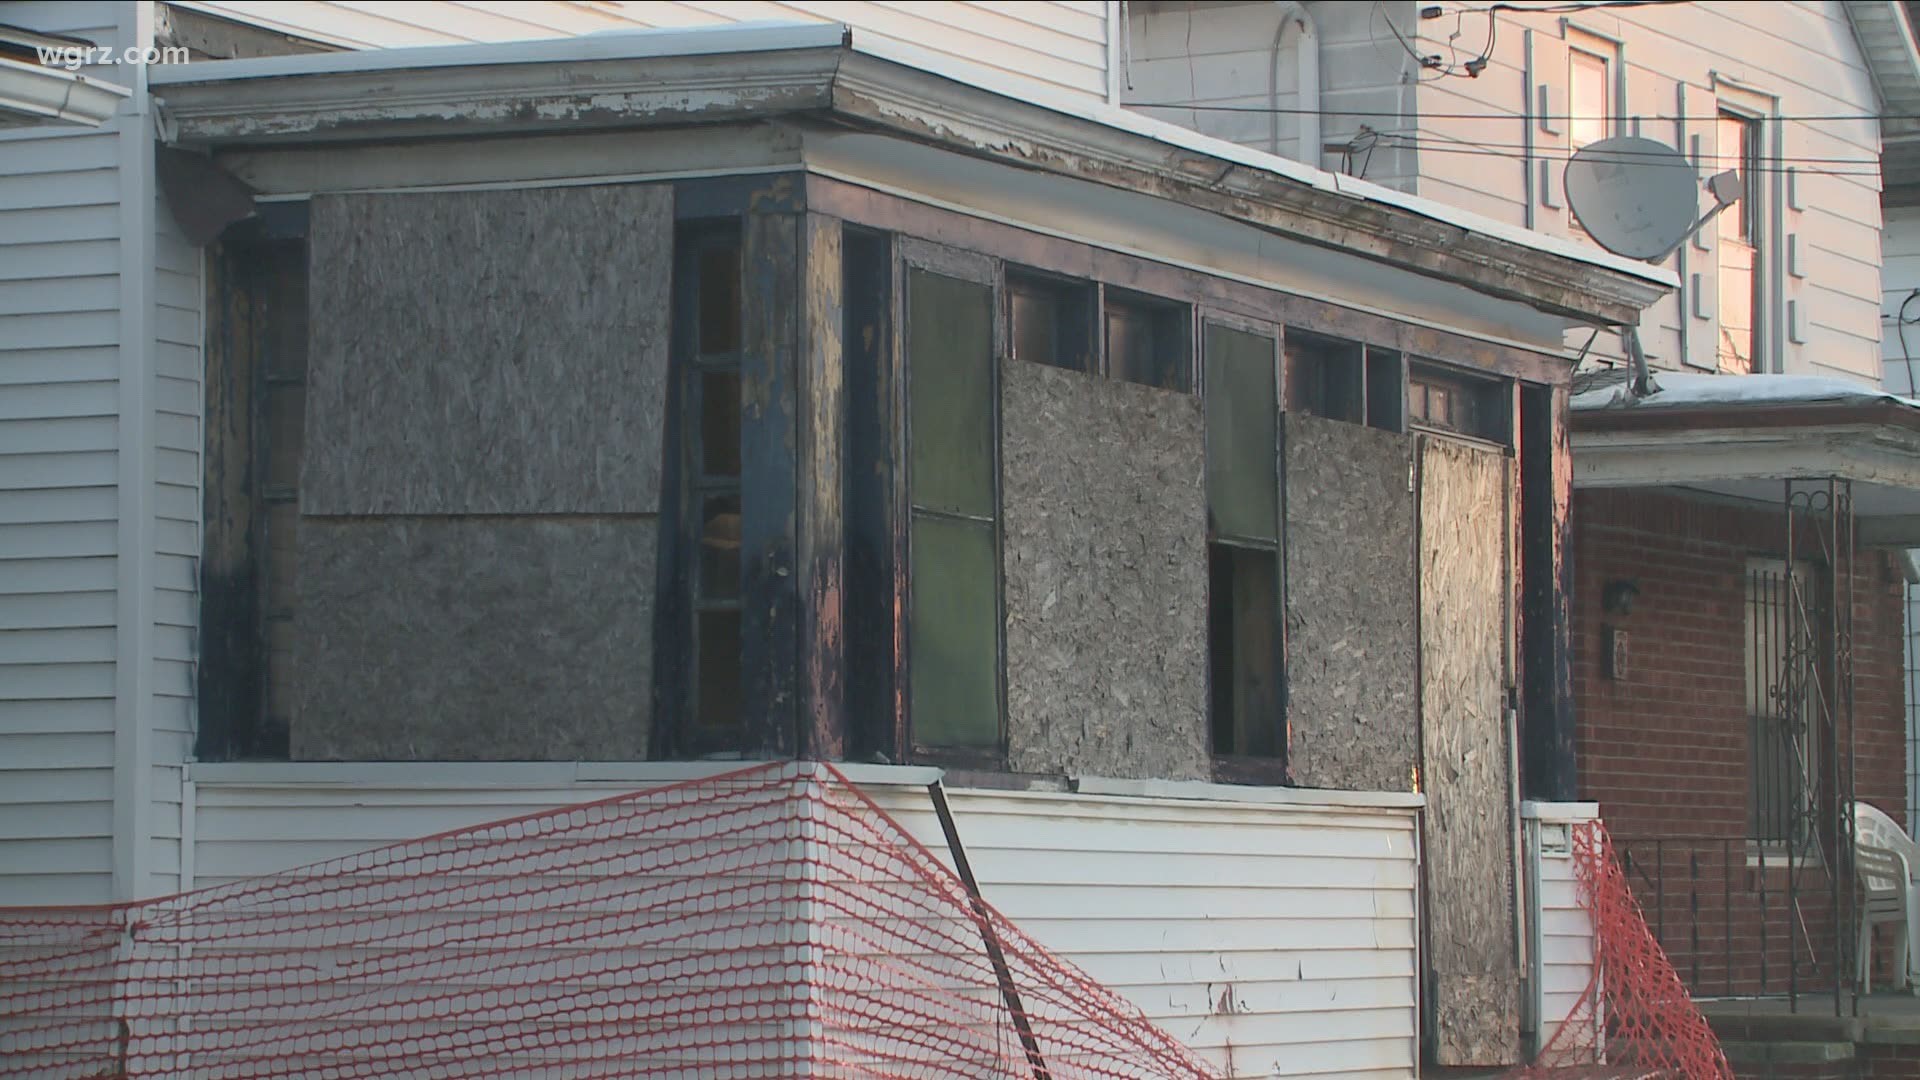 Niagara Falls Mayor Robert Restaino said the city has neglected taking down abandoned homes for far too long. The work began on Fairfield Avenue.